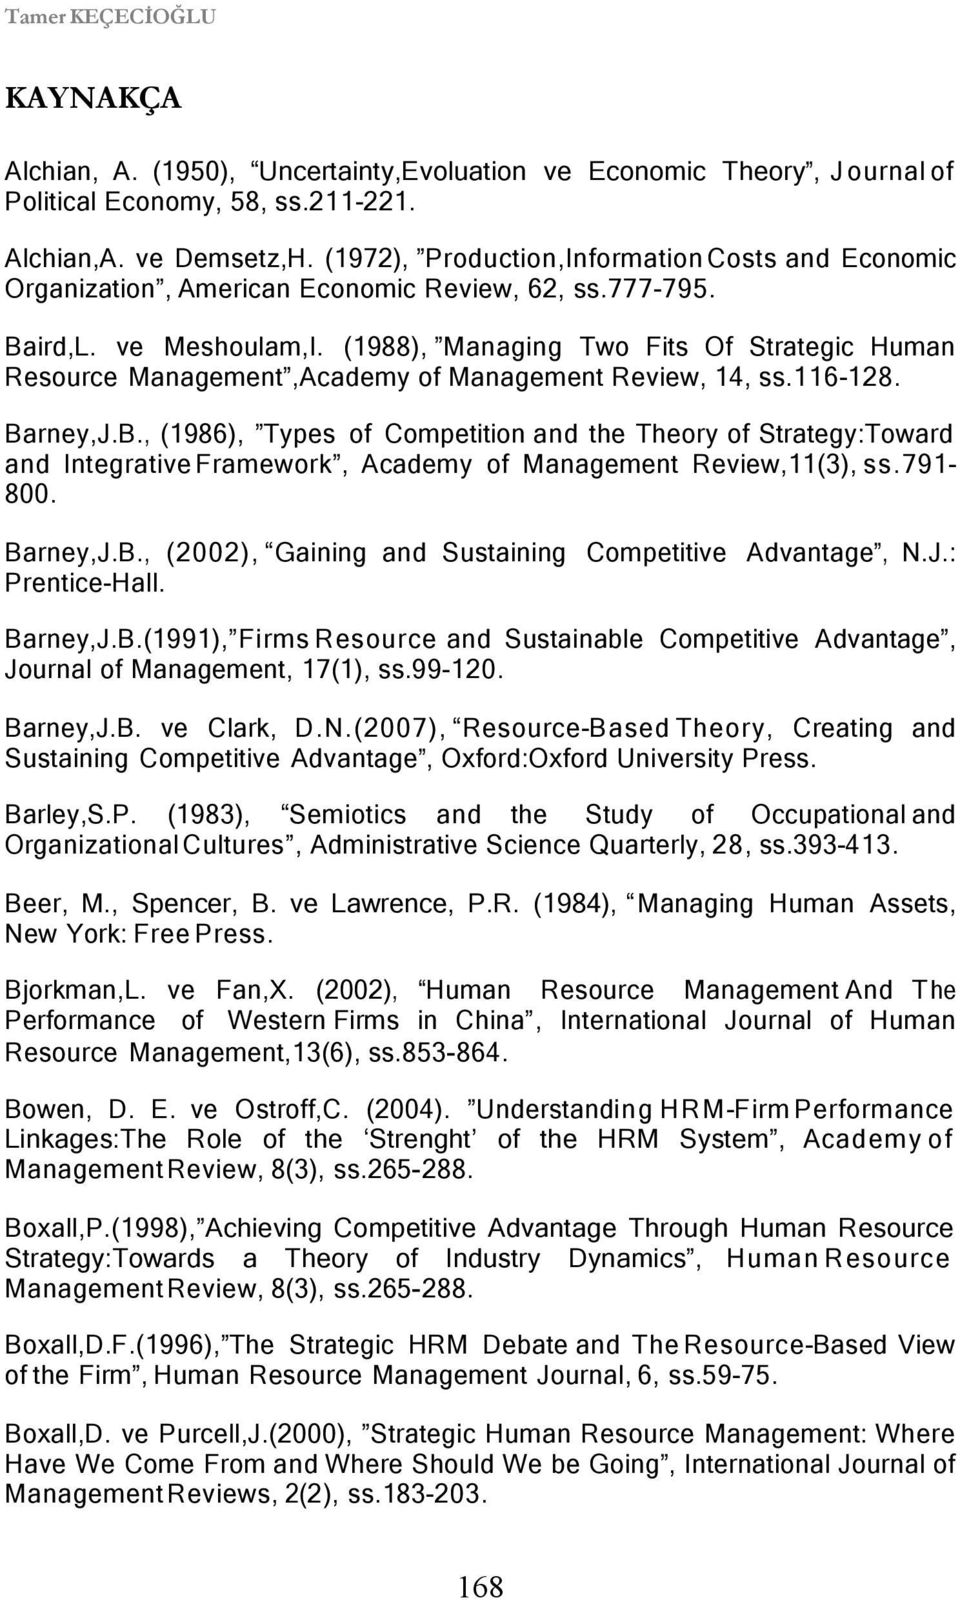 (1988), Managing Two Fits Of Strategic Human Resource Management,Academy of Management Review, 14, ss.116-128. Ba